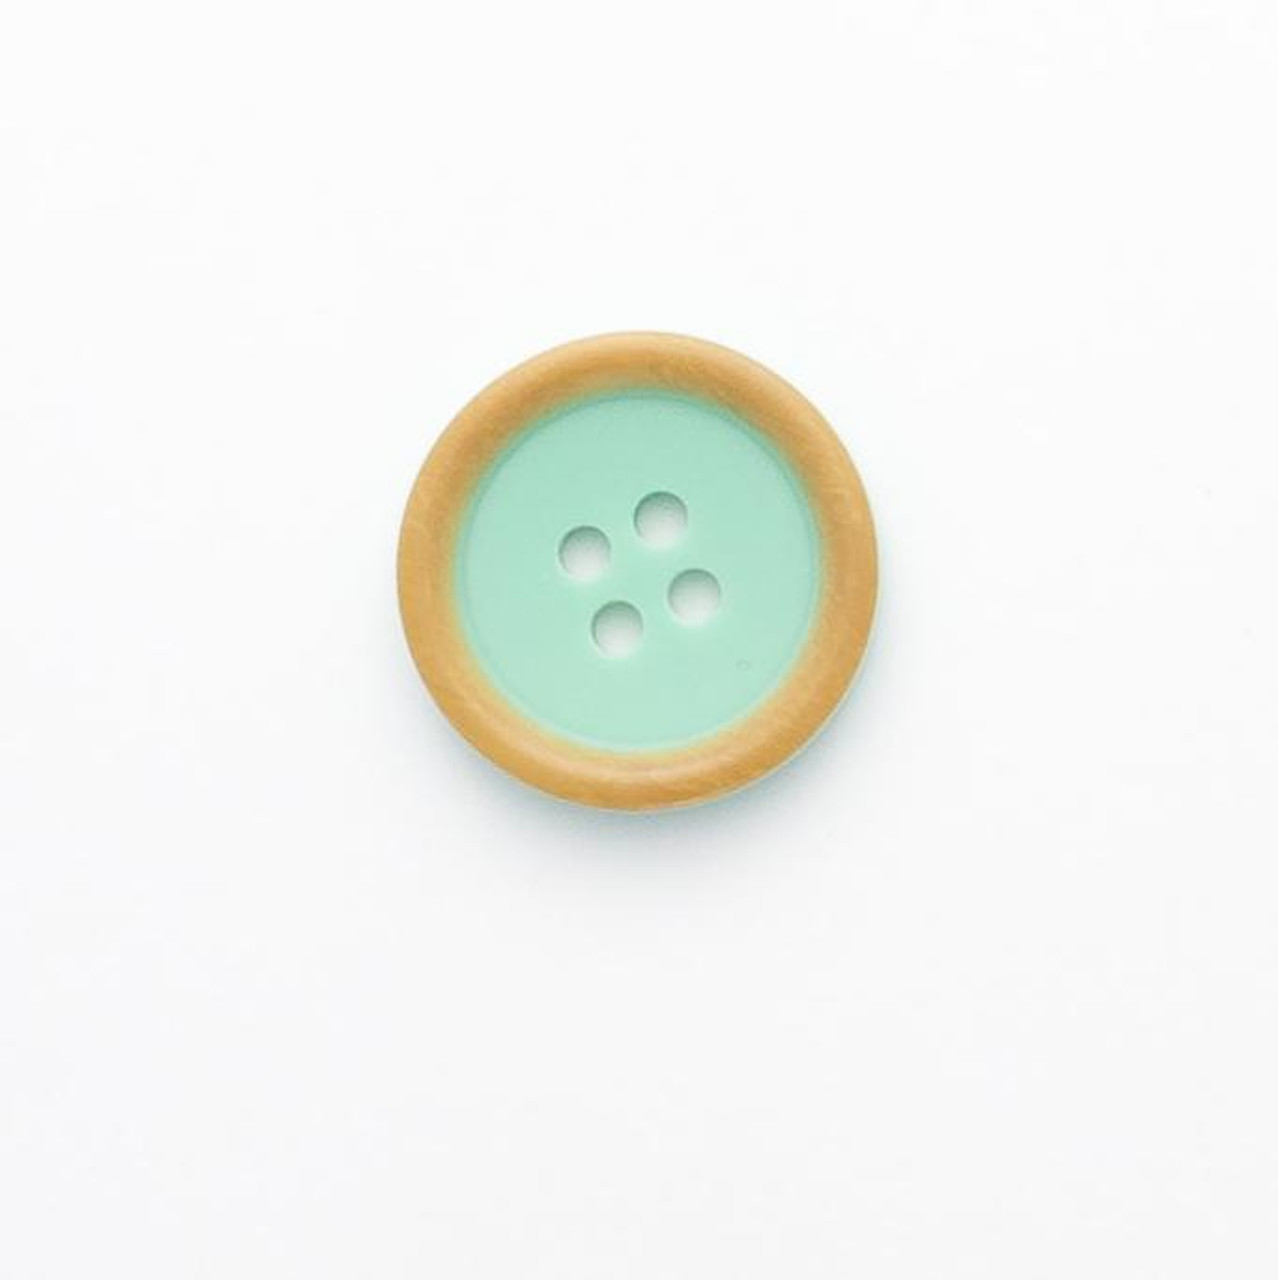 Mint 4 Hole Button Size - 20mm (Sold Single)